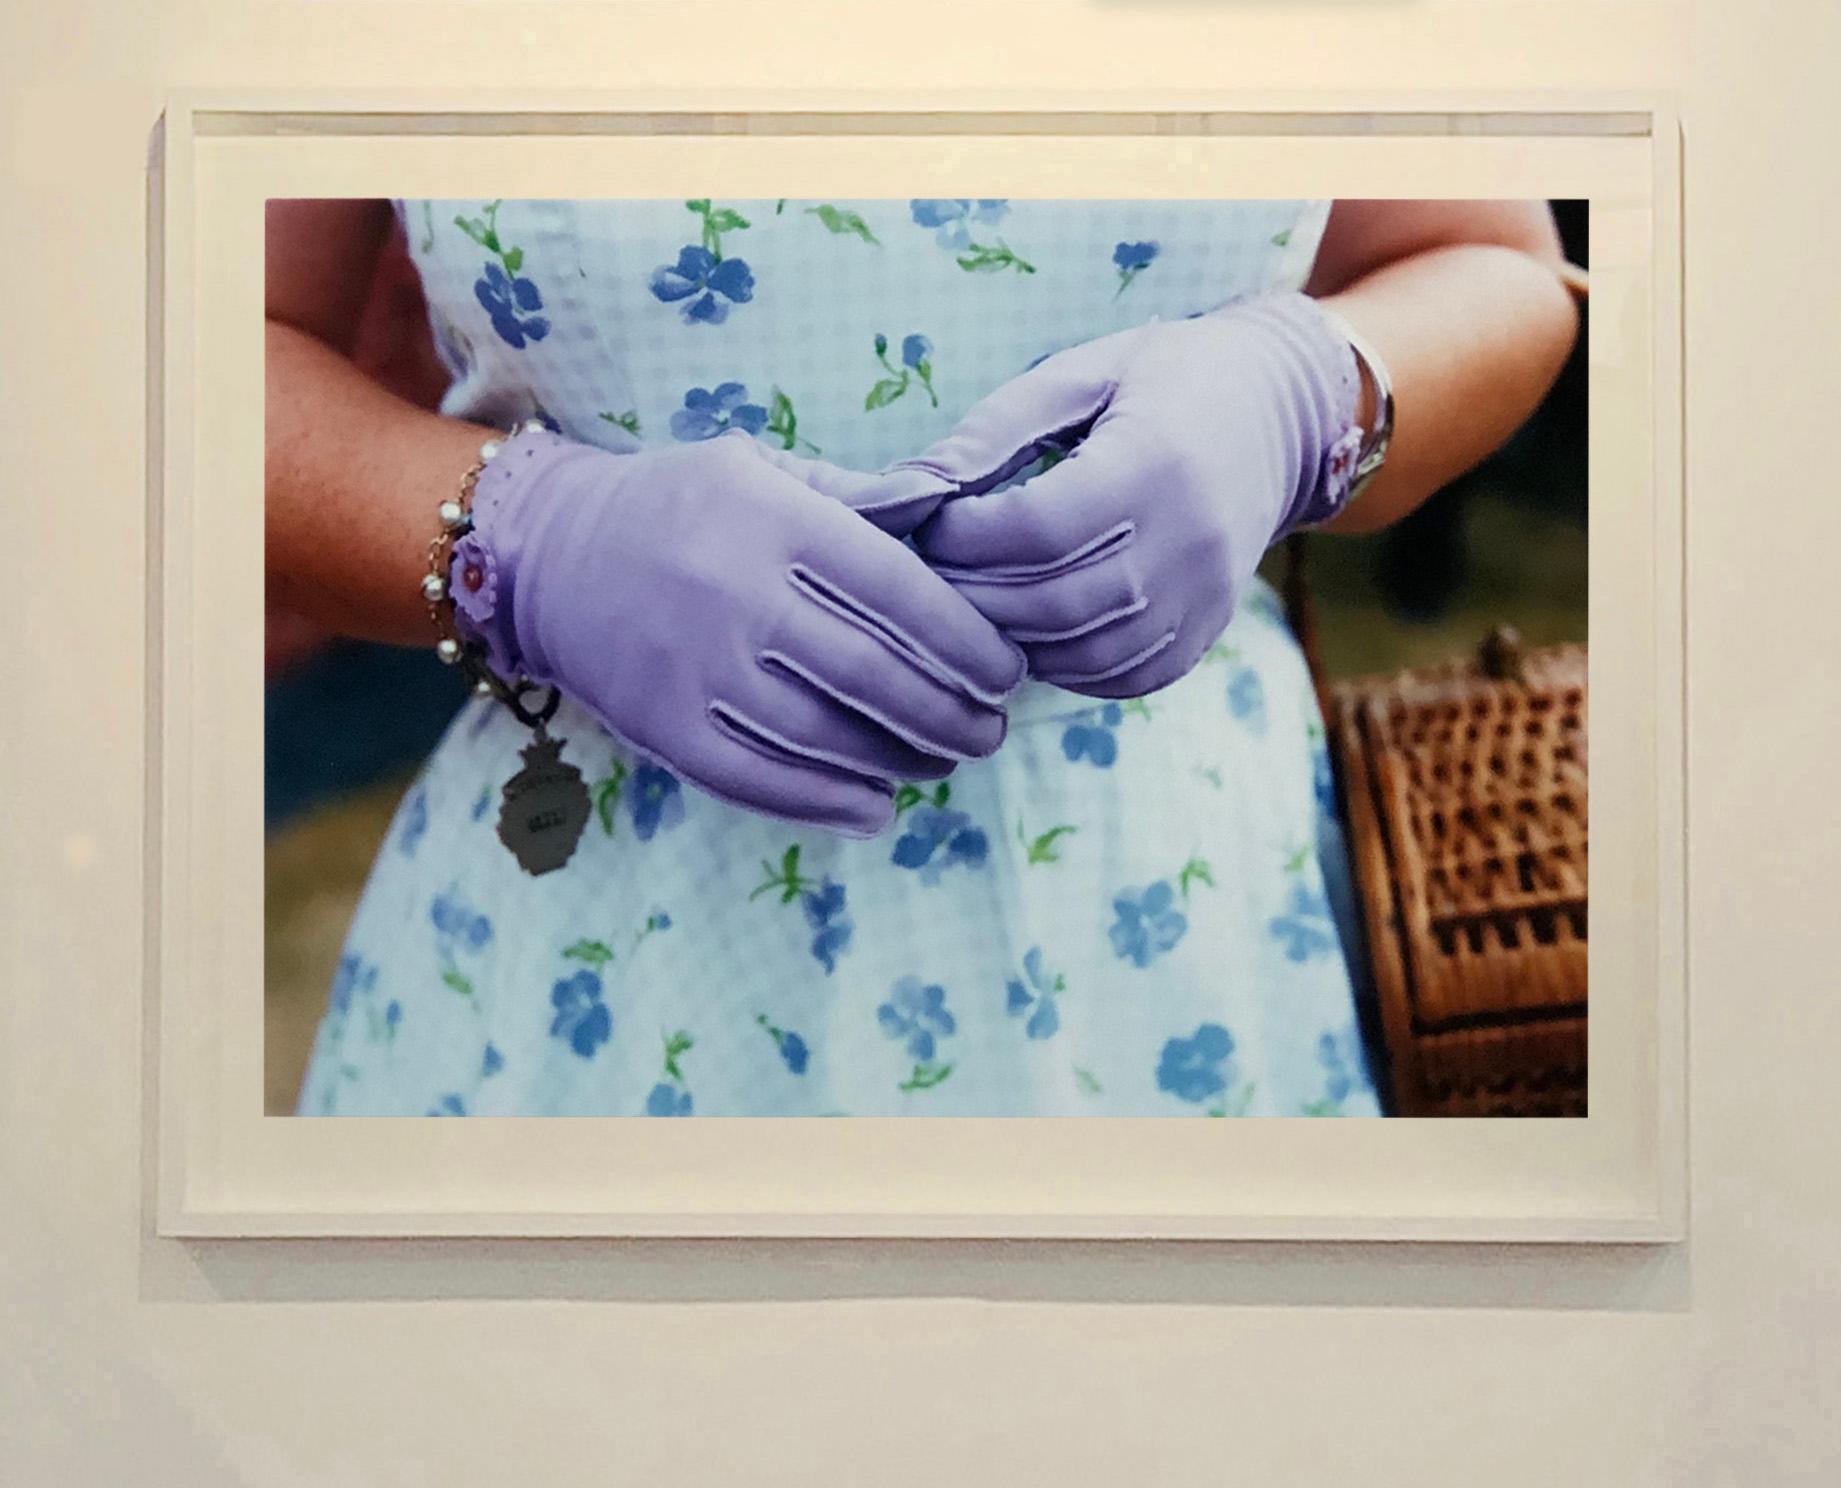 Lilac Gloves, Goodwood, Chichester - Feminine fashion, color photography - Contemporary Photograph by Richard Heeps